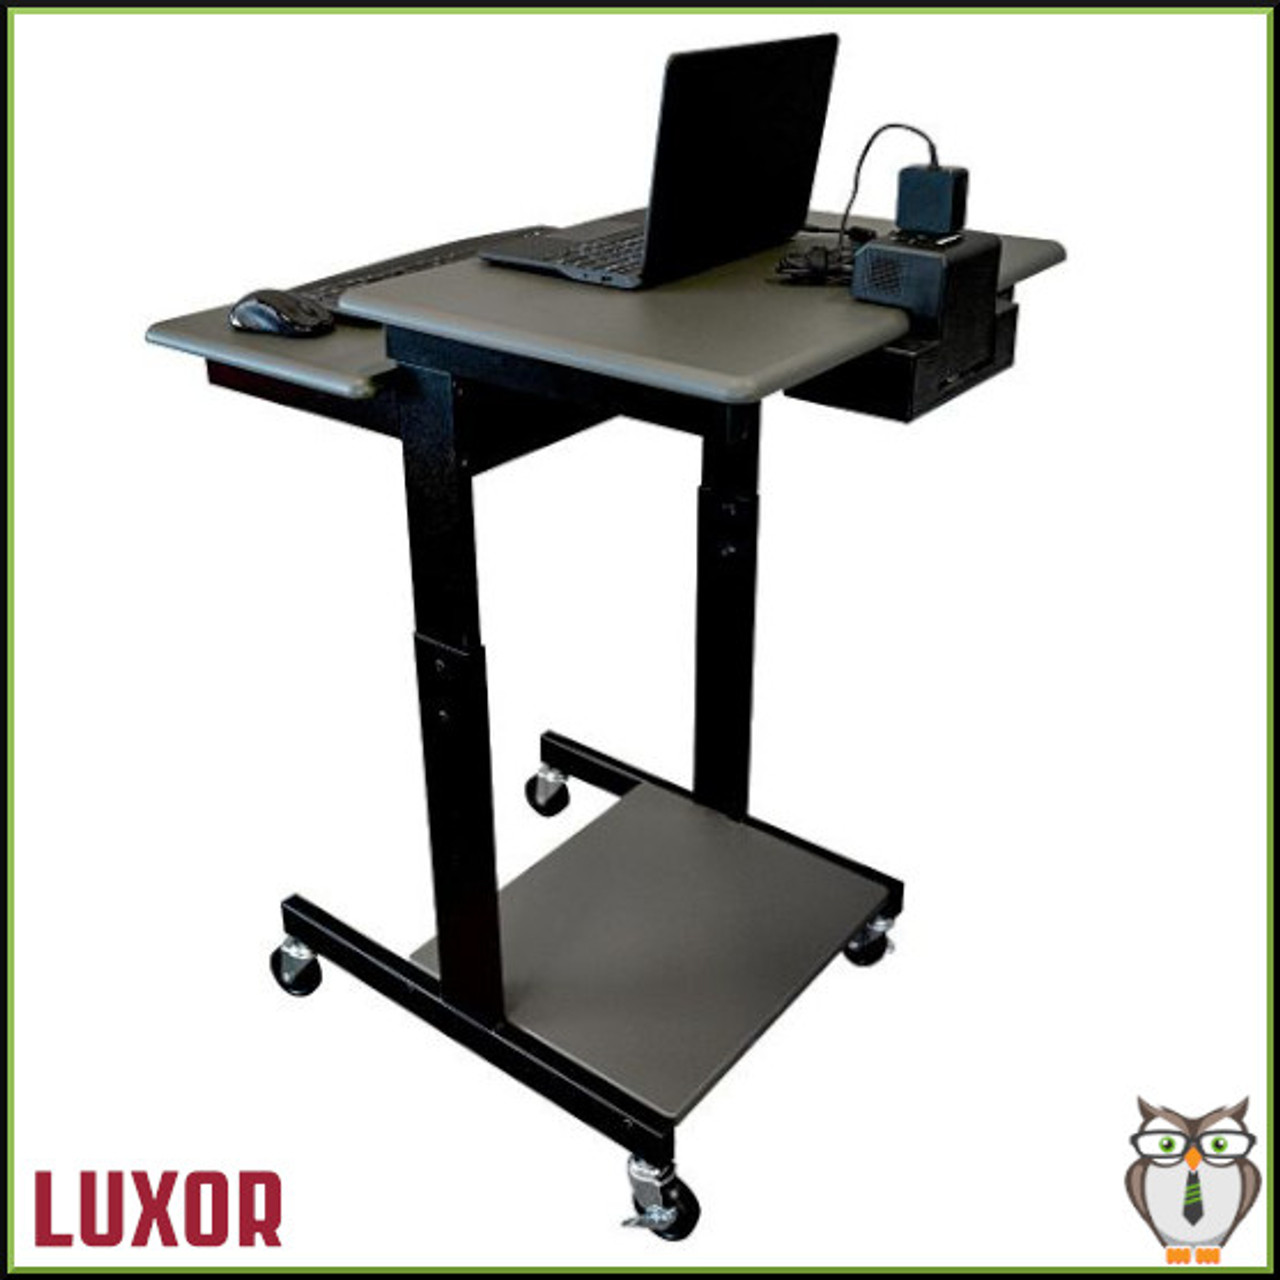 Luxor Mobile Computer Cart with Battery-Powered Device Charger (PS3945-KBEP)